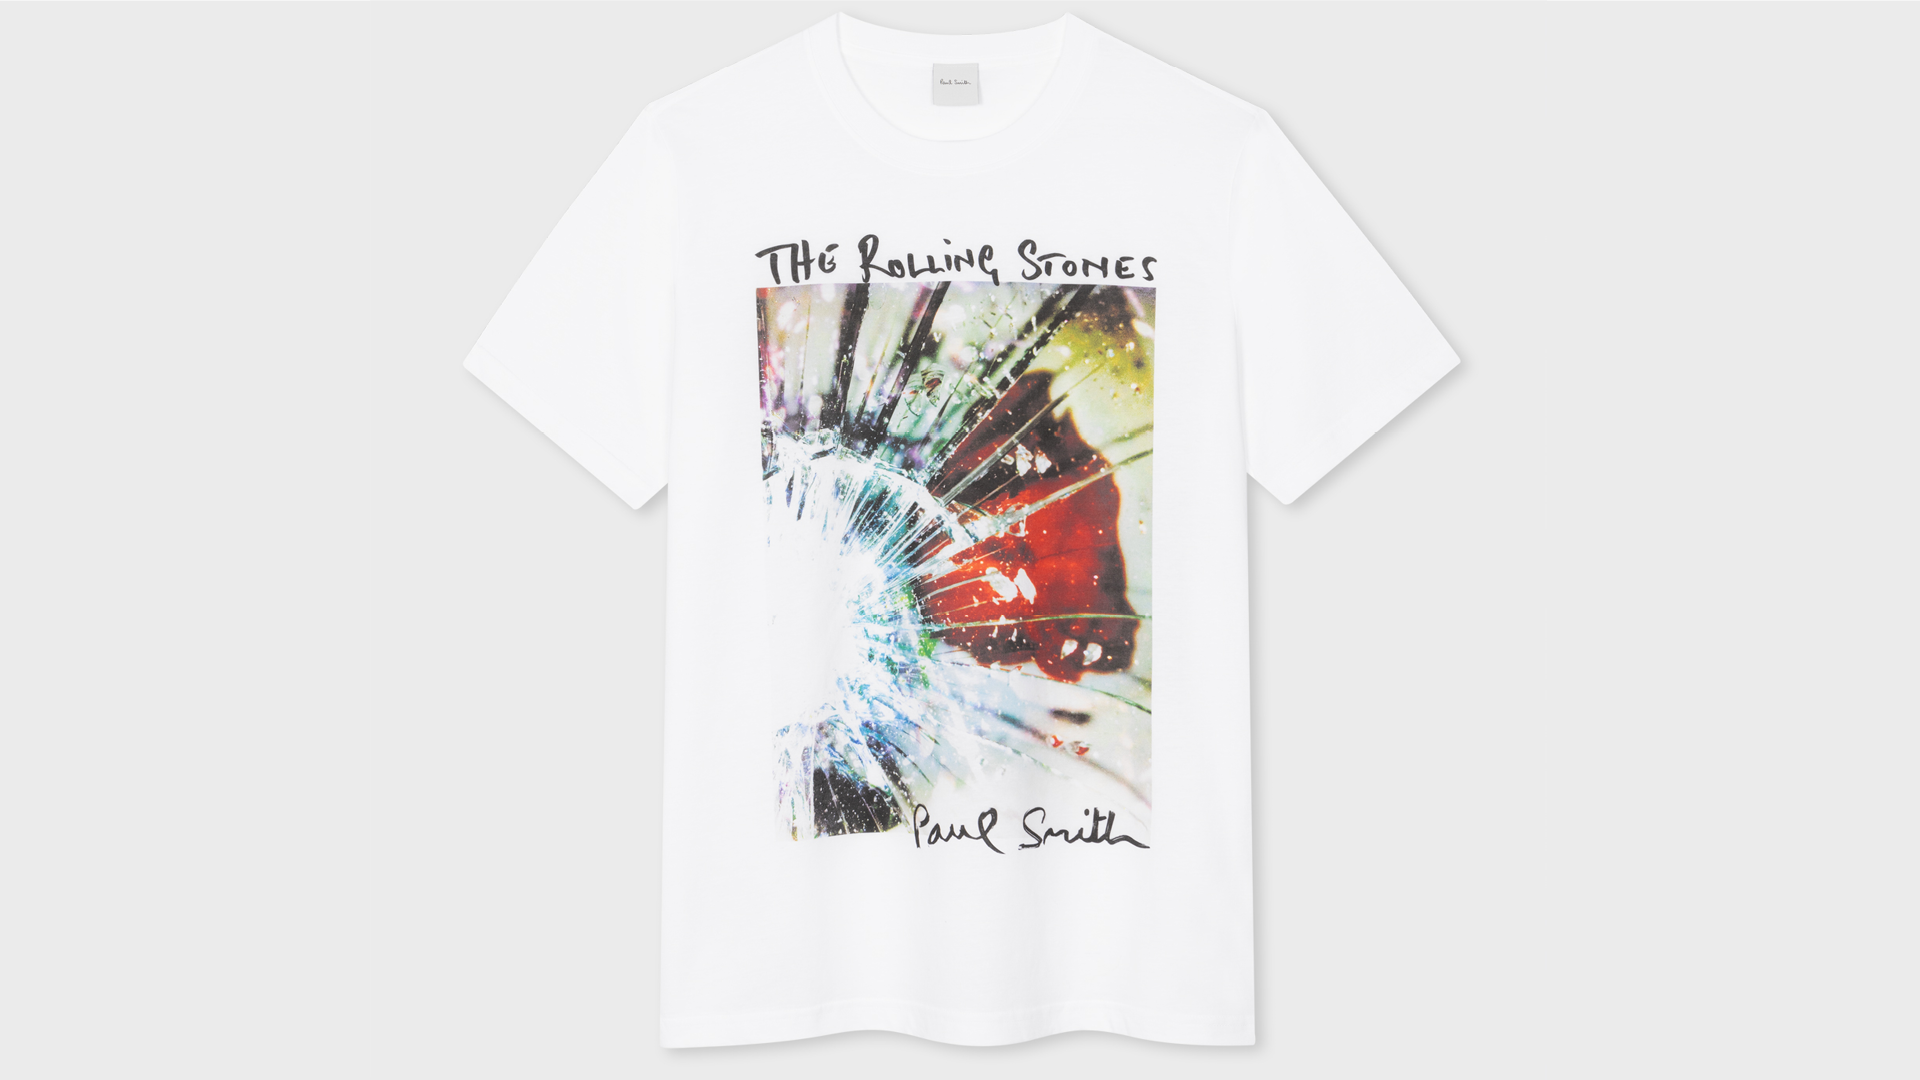 Paul Smith Teams Up with The Rolling Stones on Exclusive 'Hackney